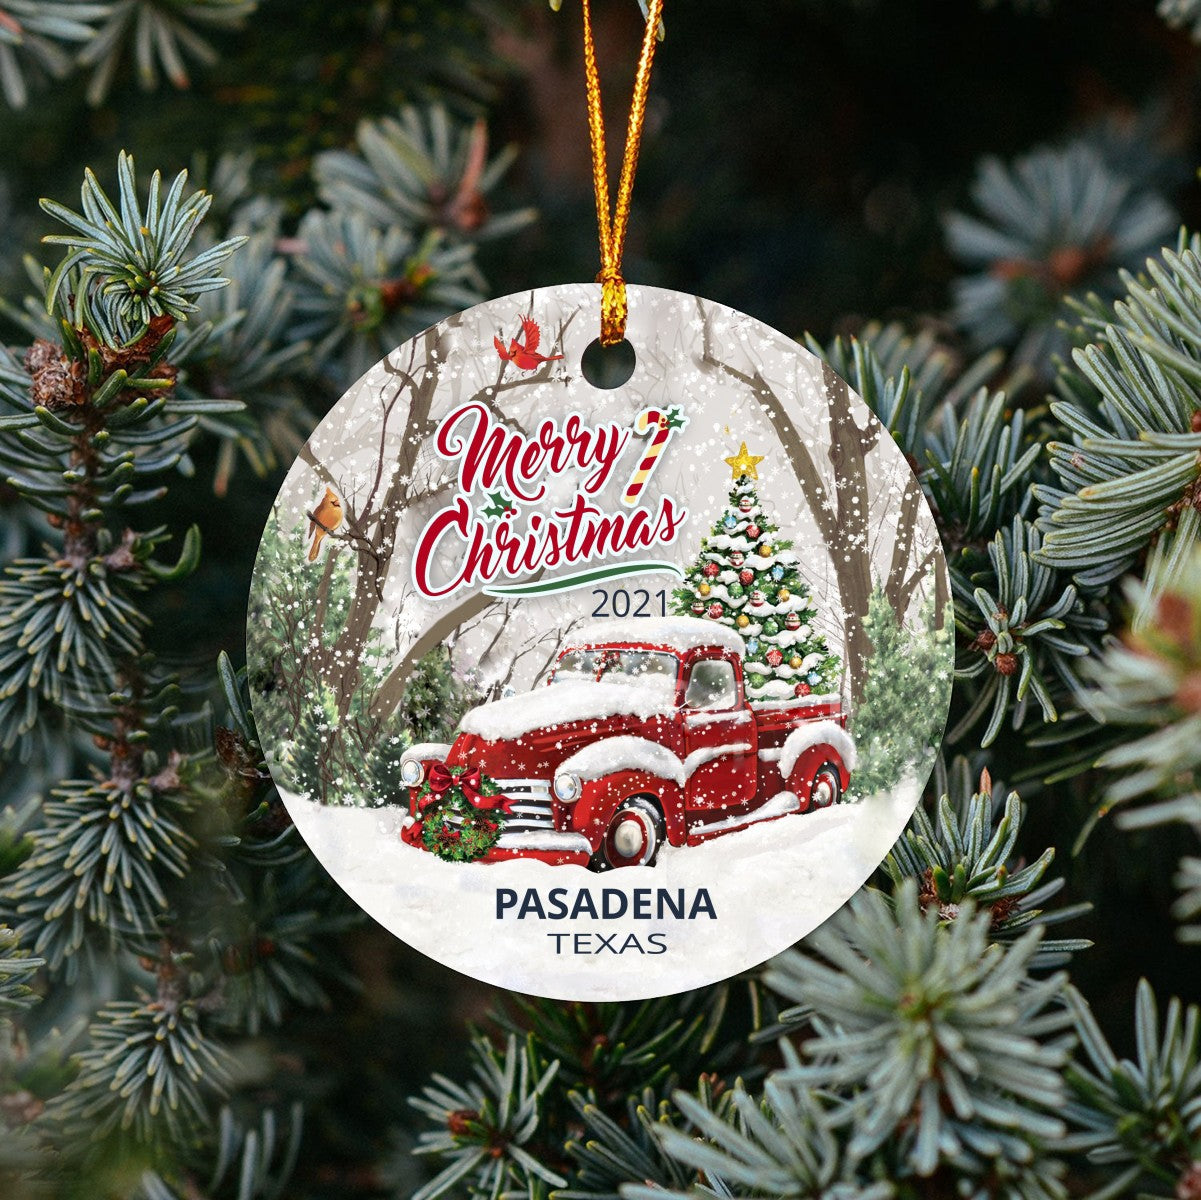 Christmas Tree Ornaments Pasadena - Ornament Customize With Name City And State Pasadena Texas TX - Red Truck Xmas Ornaments 3'' Plastic Gift For Family, Friend And Housewarming